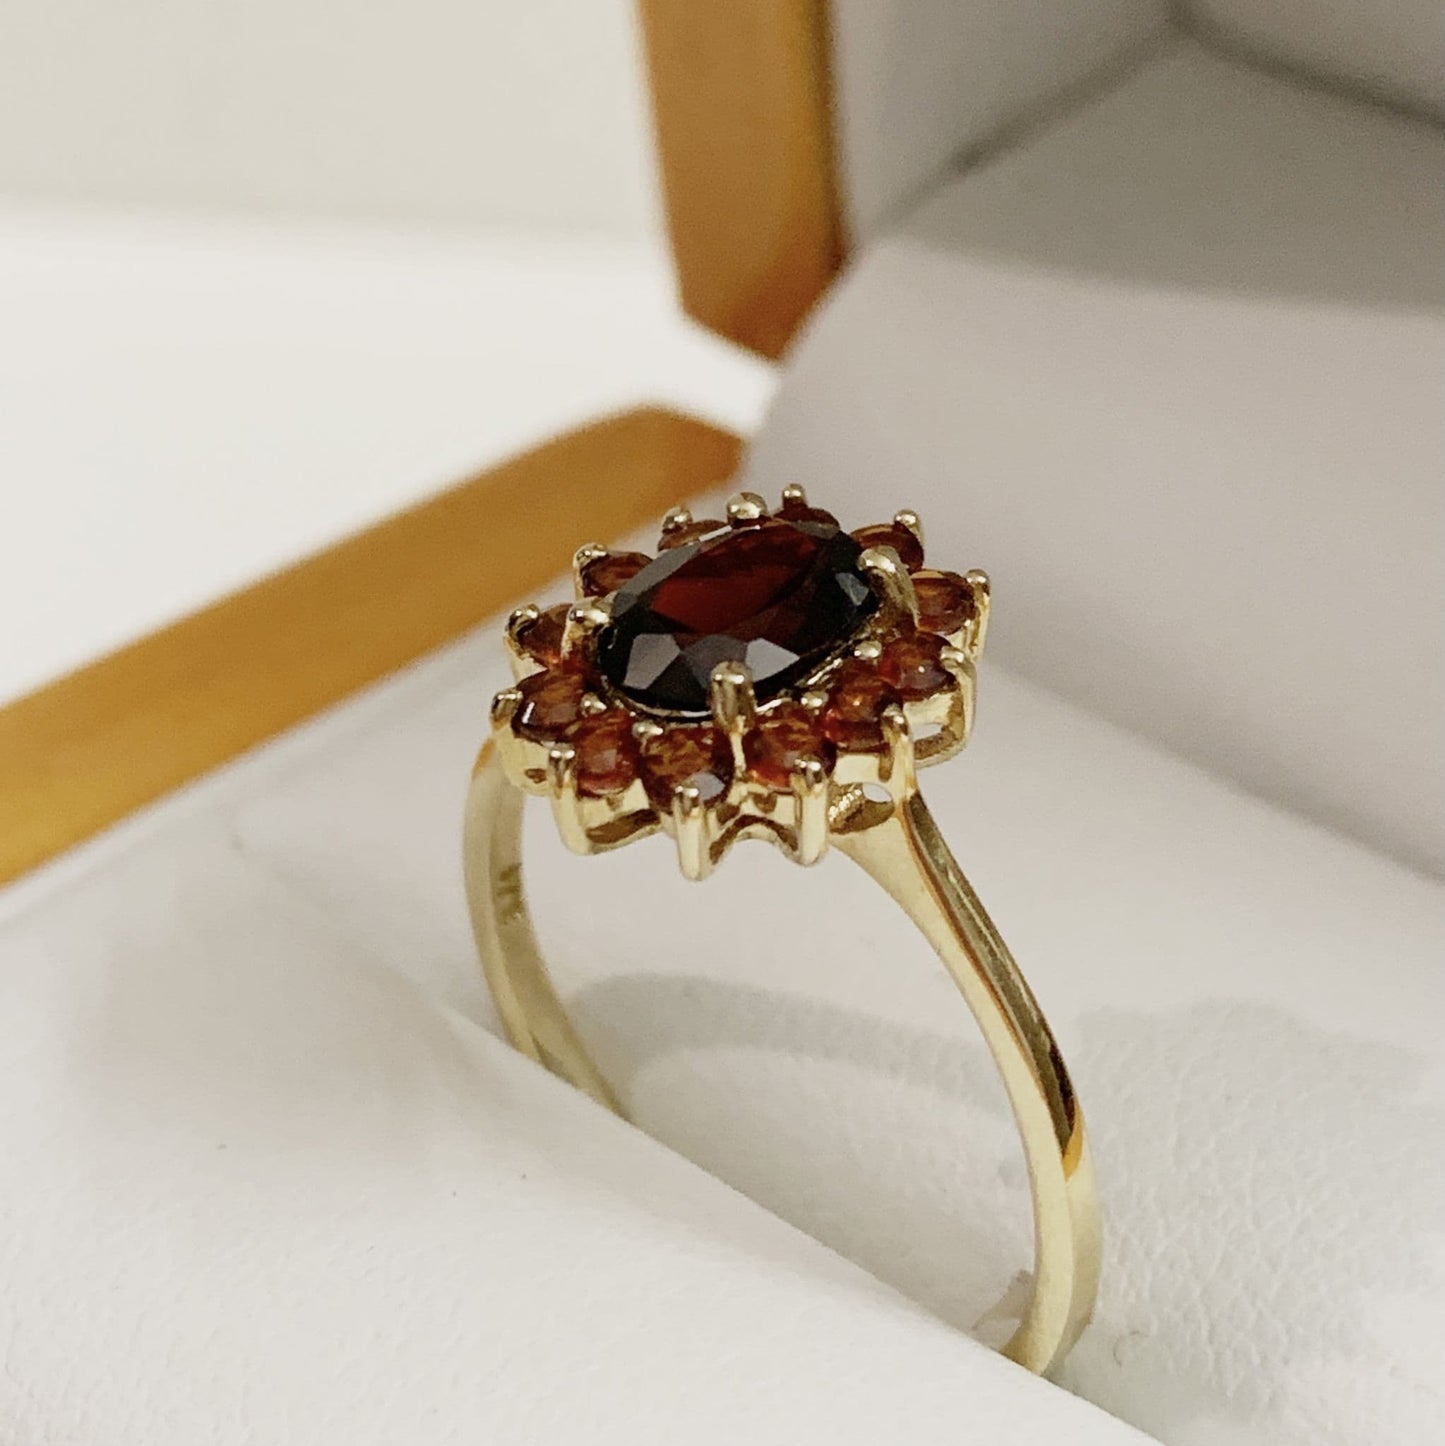 Oval Garnet Cluster Ring Yellow Gold